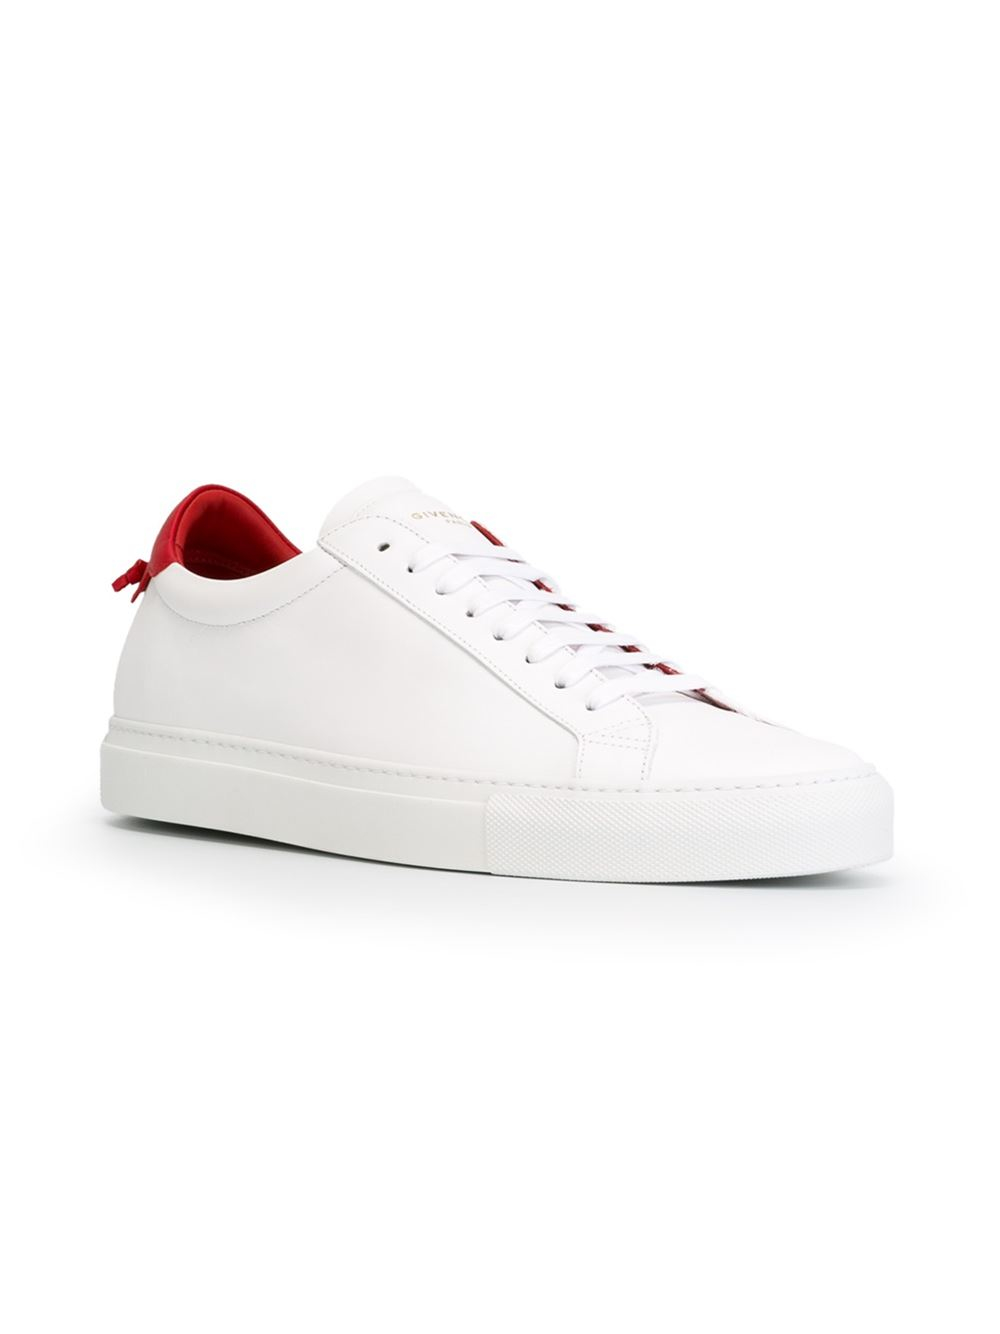 Givenchy Classic Leather Low-Top Sneakers in White for Men | Lyst